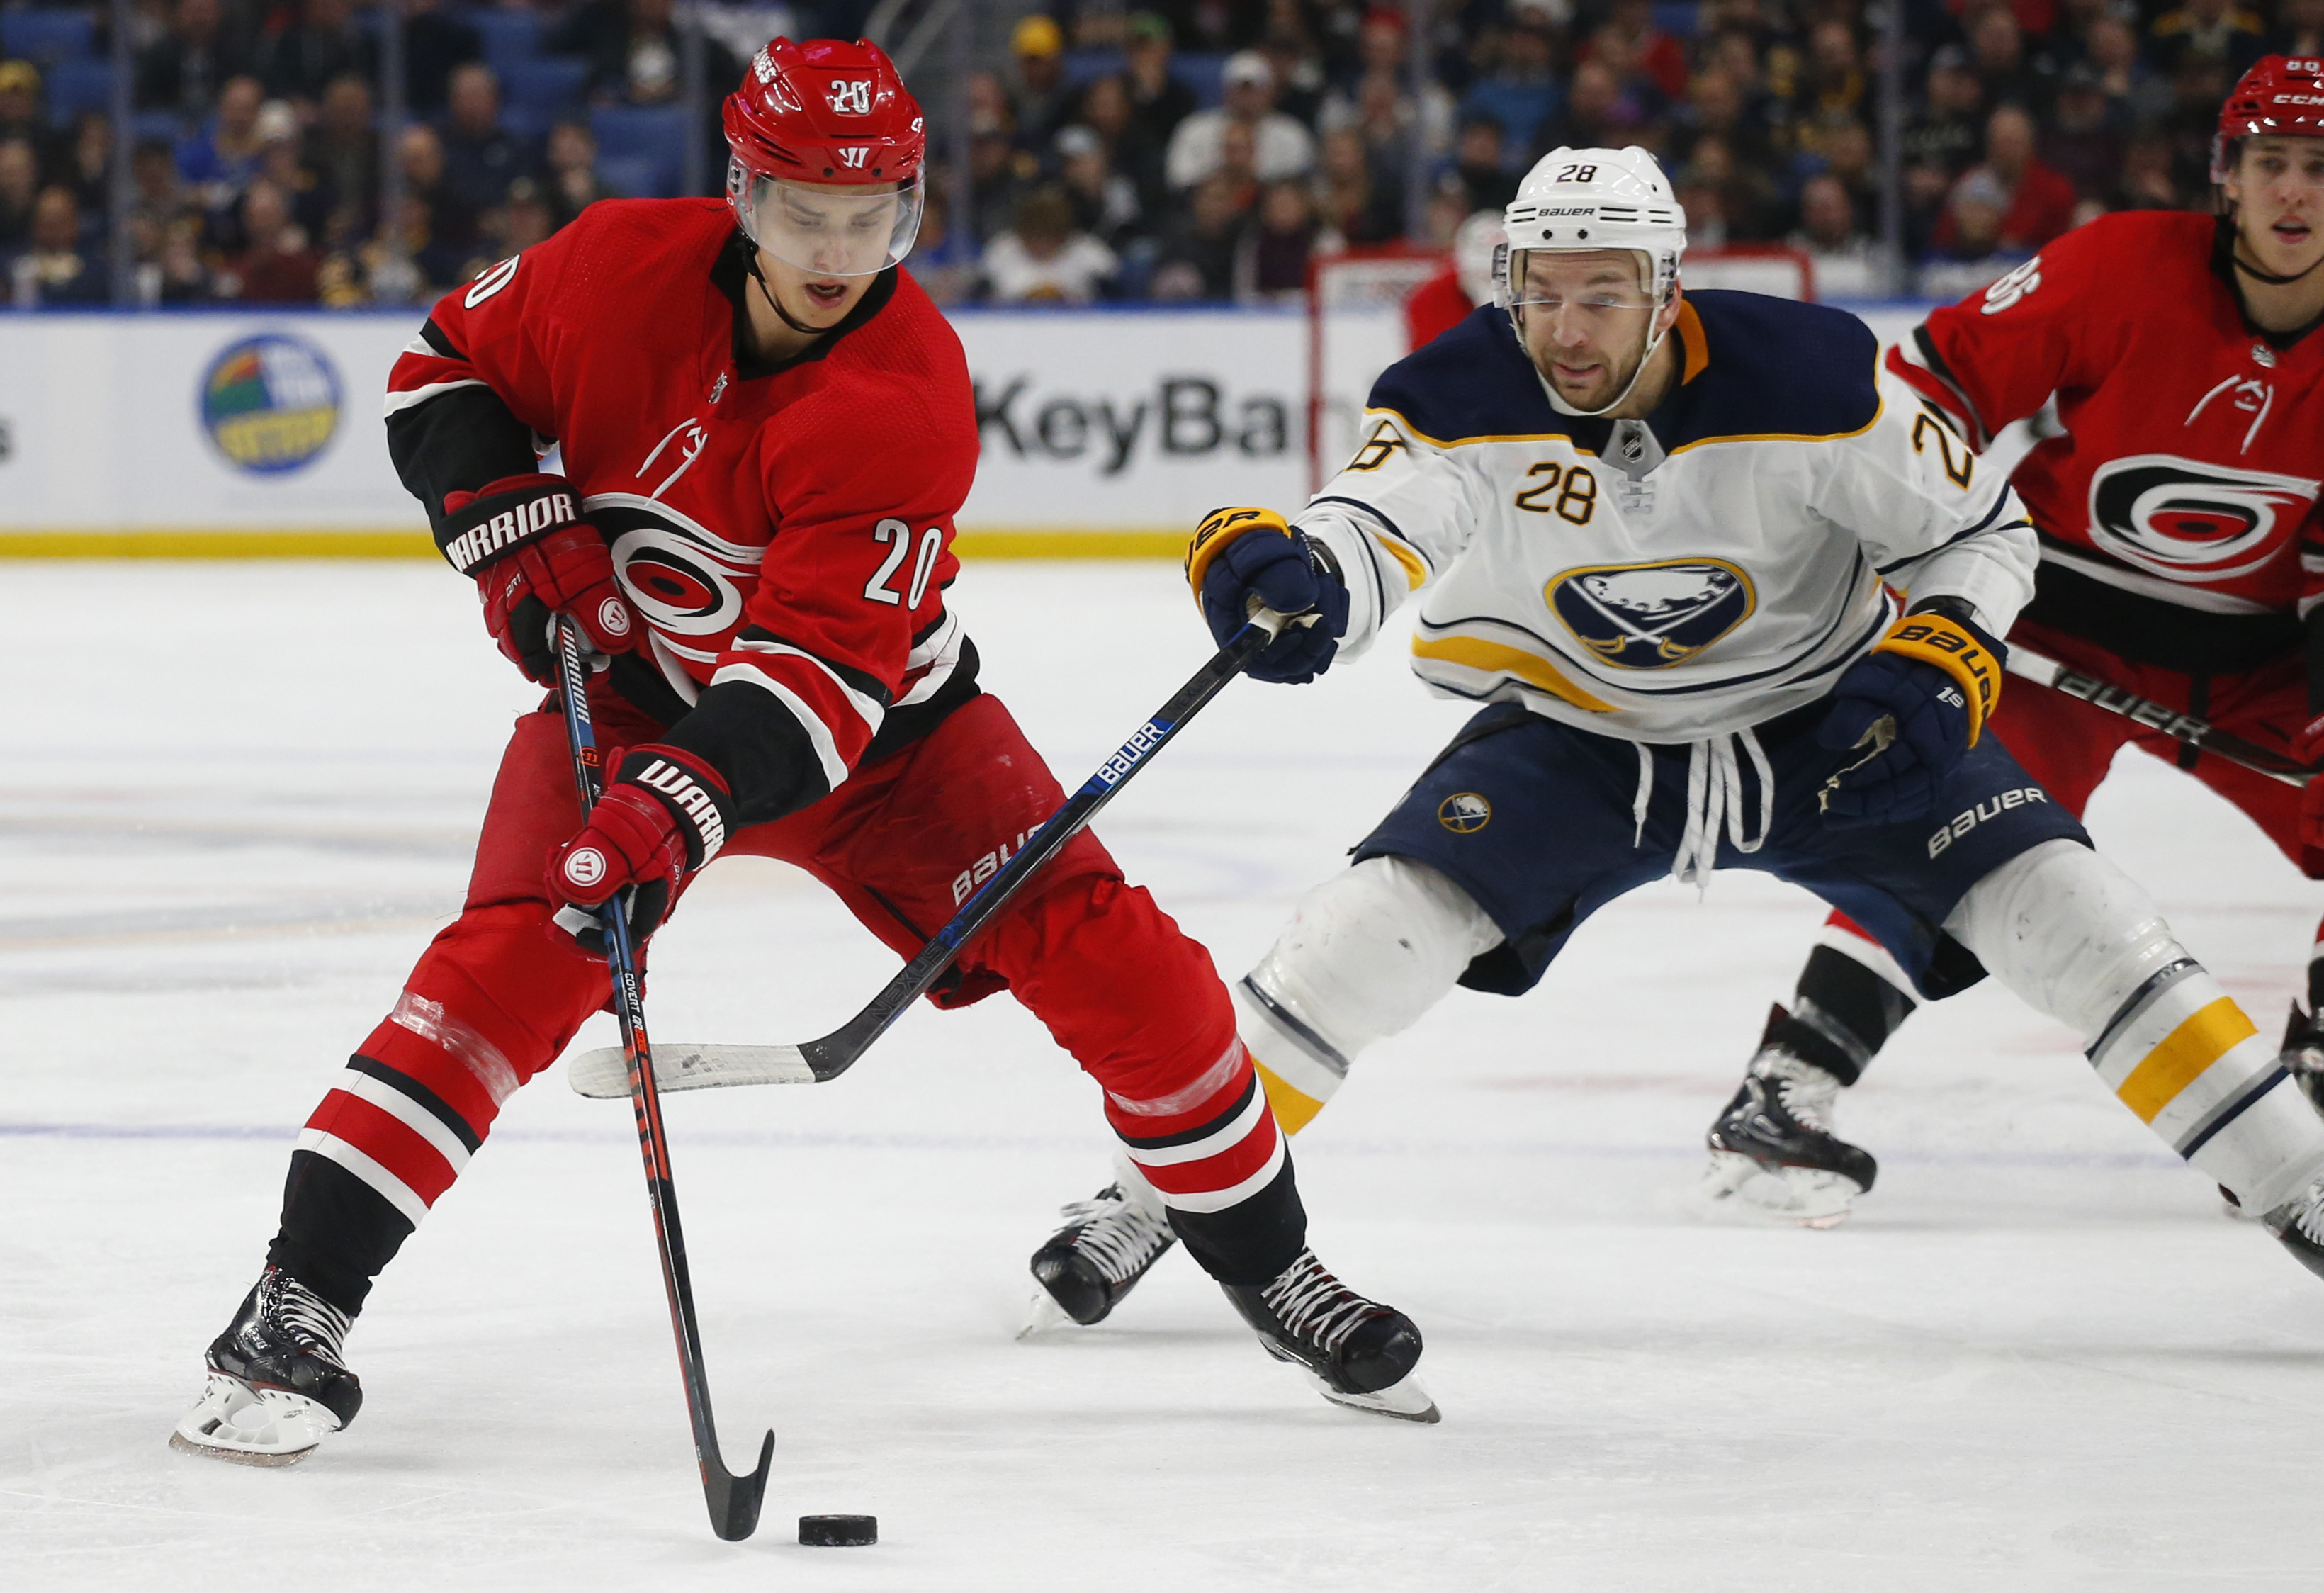 Teravainen OT goal lifts Hurricanes to 6-5 win over Sabres